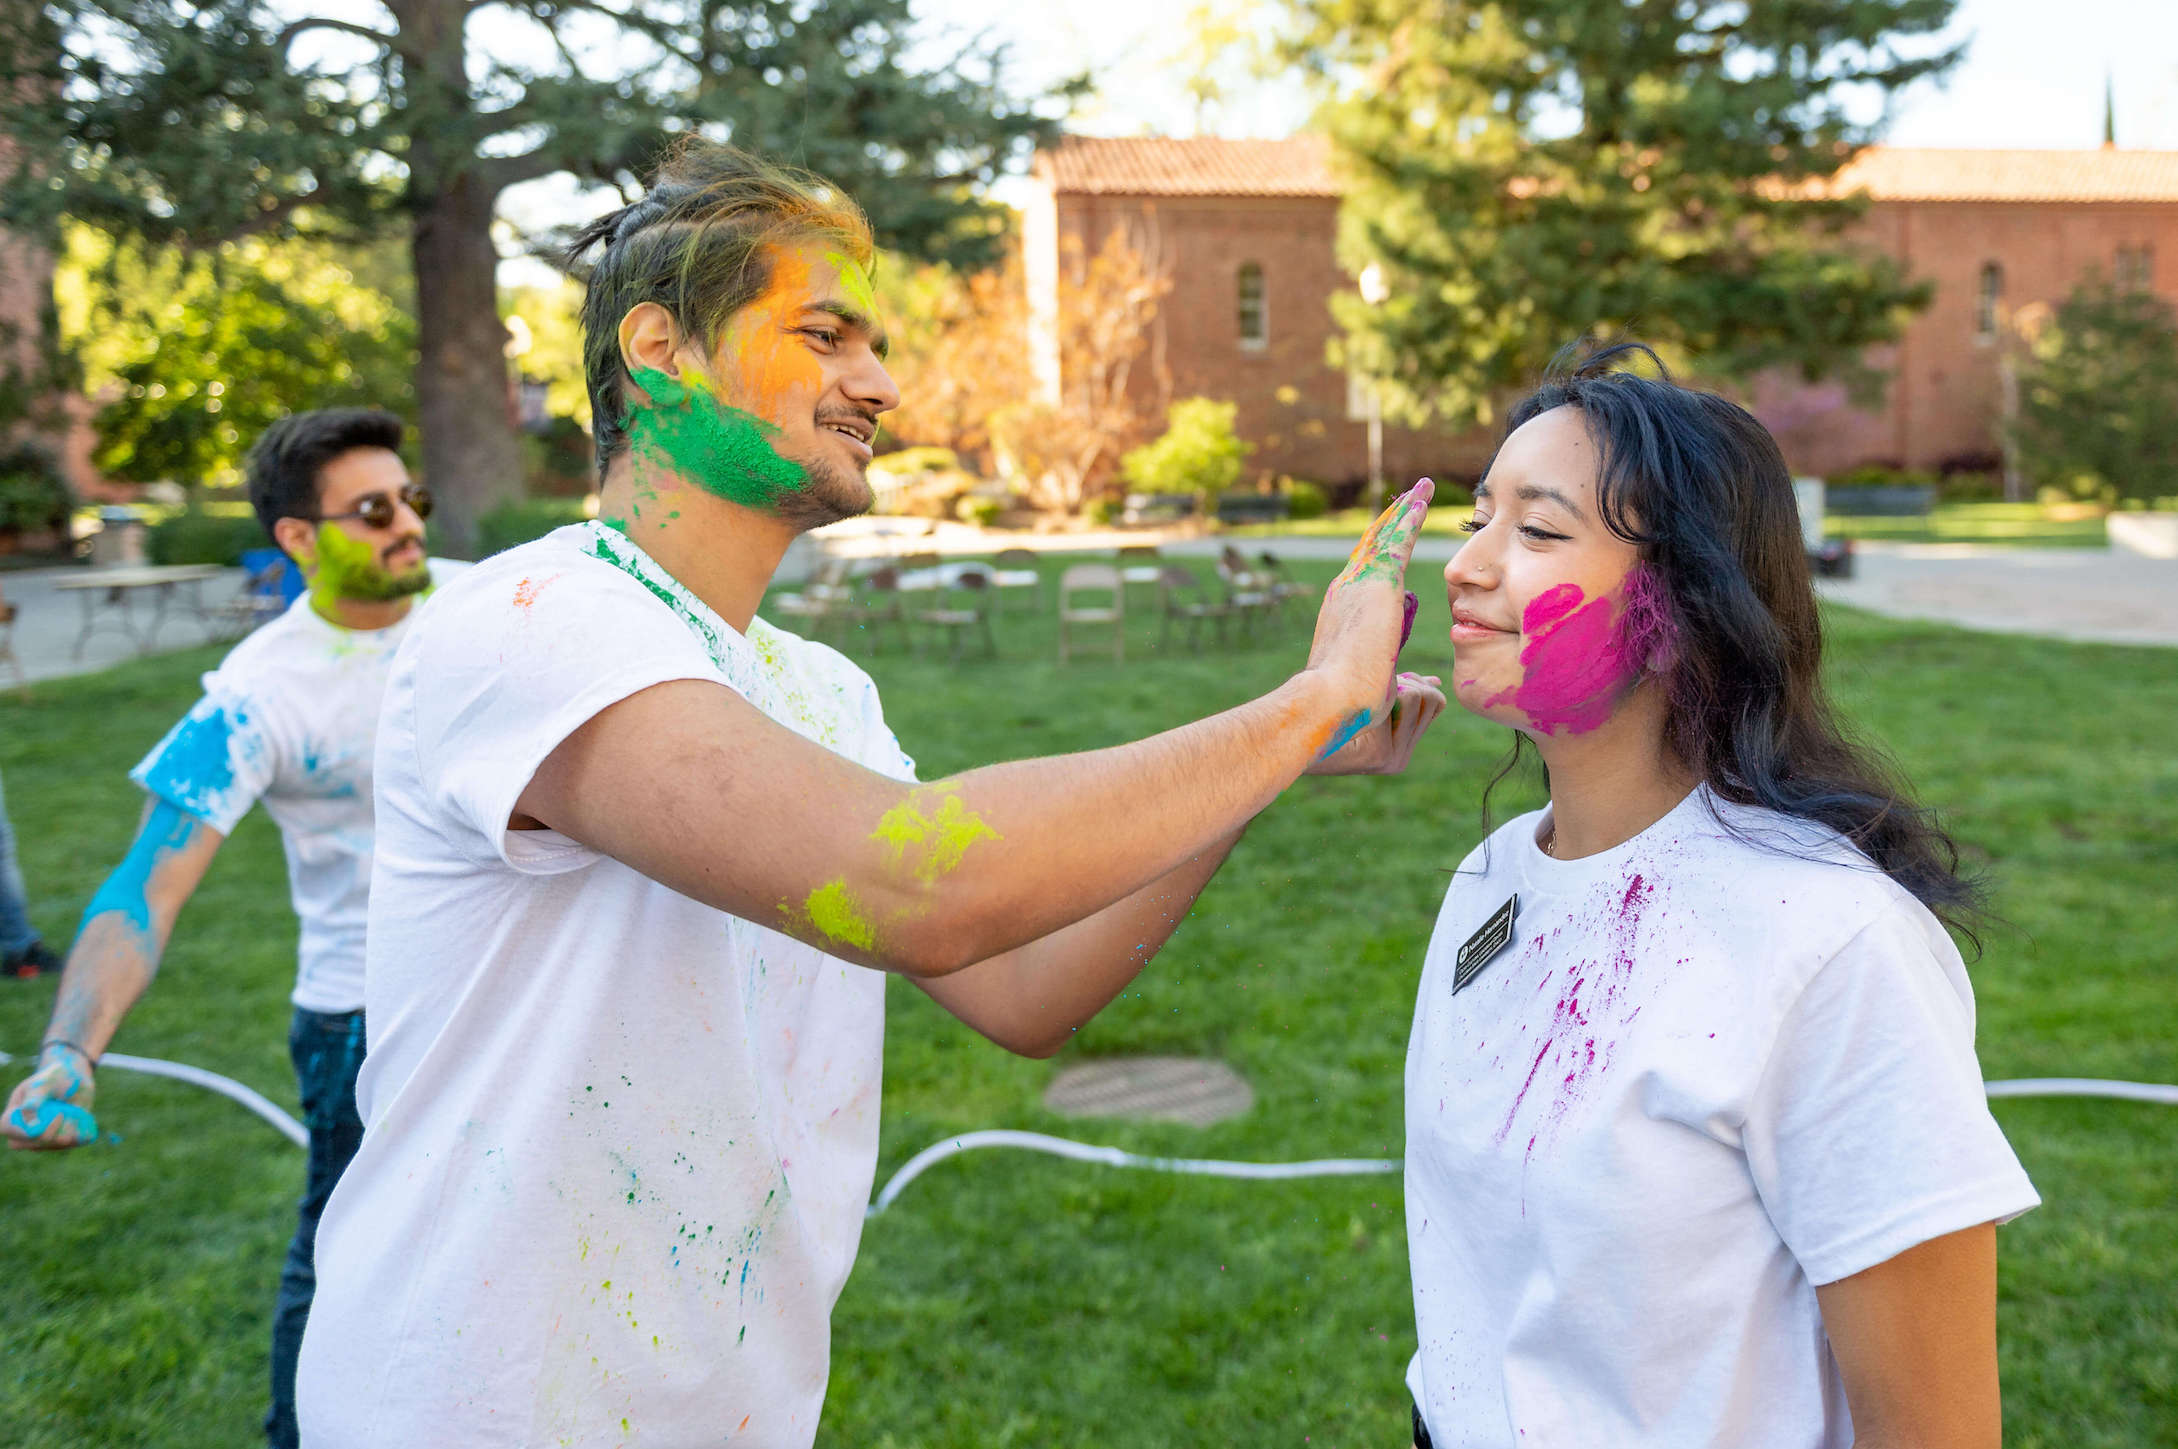 Student putting colors on another student's face for the Holi Celebration, also known as the Festival of Colors.